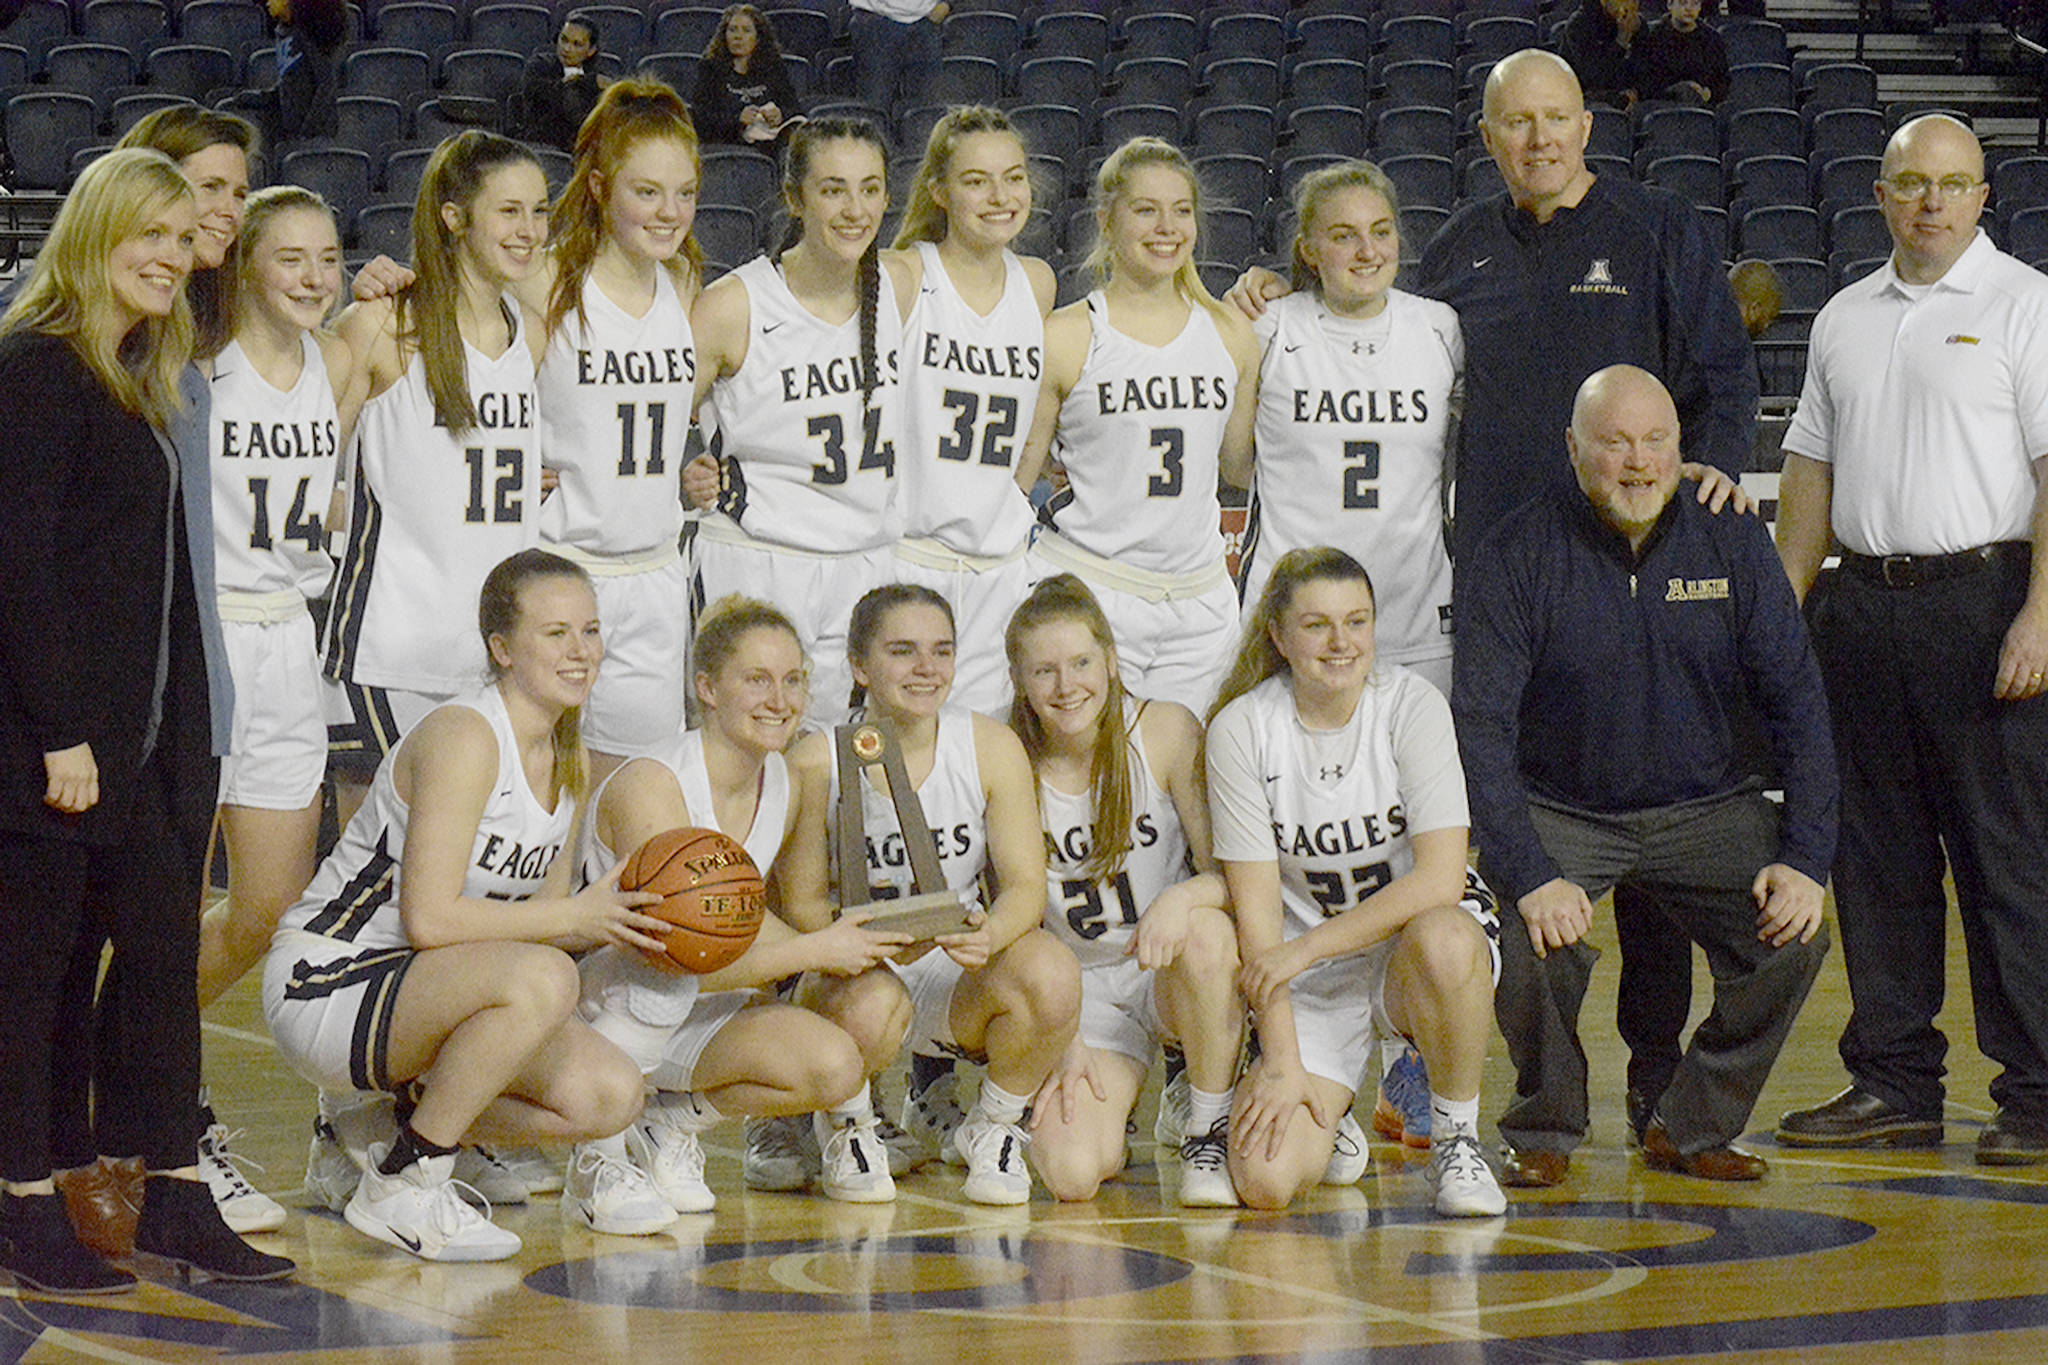 The Arlington girls basketball team poses for a picture.